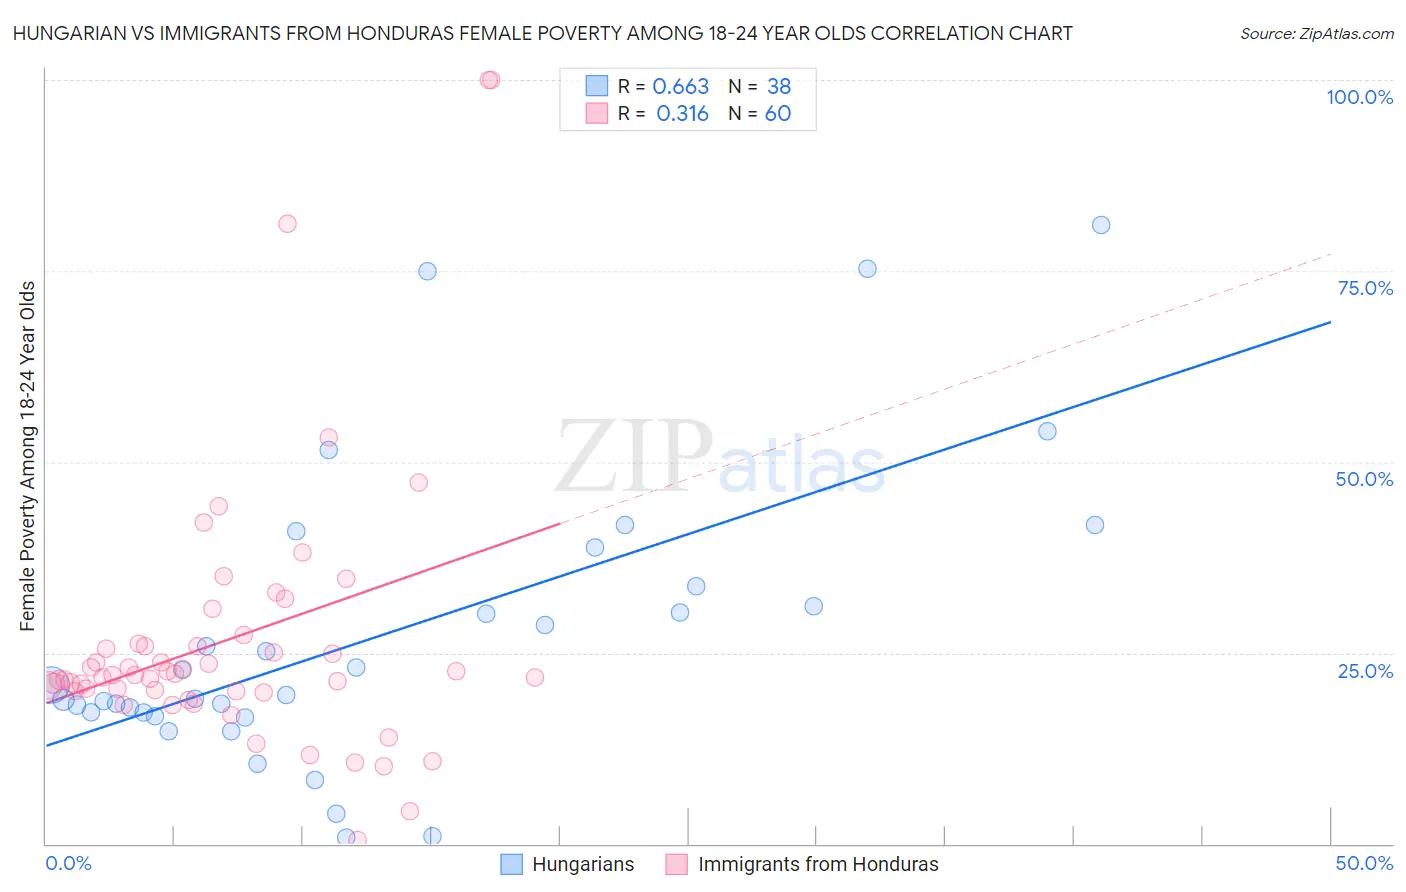 Hungarian vs Immigrants from Honduras Female Poverty Among 18-24 Year Olds